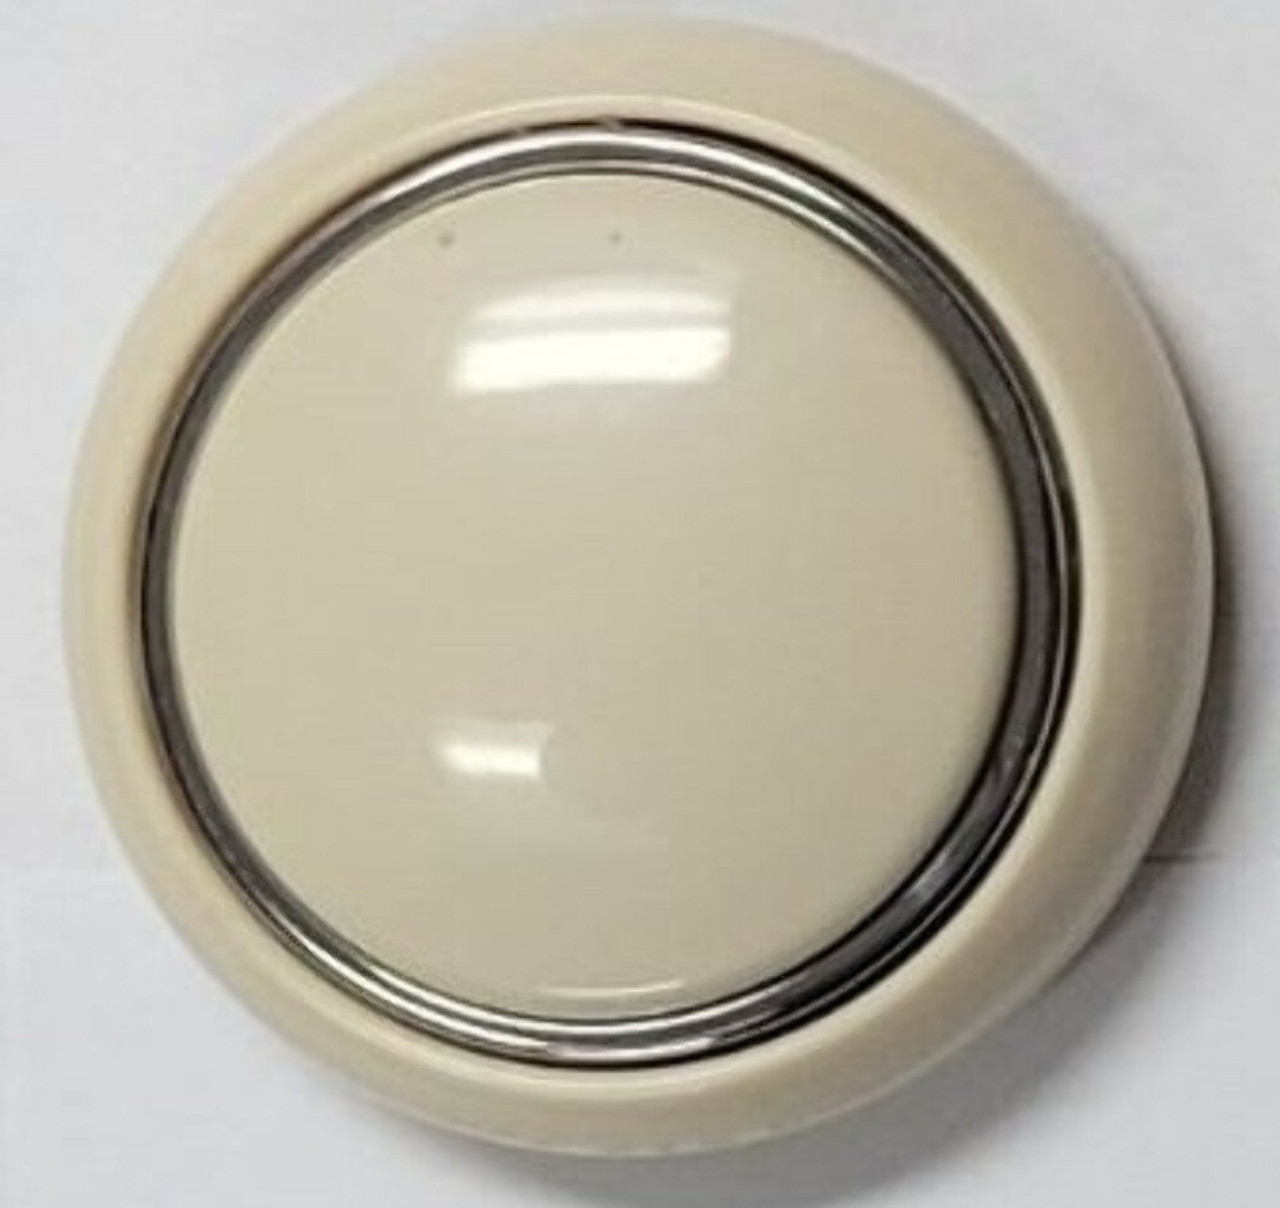 Horn Button, Ivory, Compatible with Volkswagen Type-1 Bug 56-59, Type-2 Bus 1950-1967